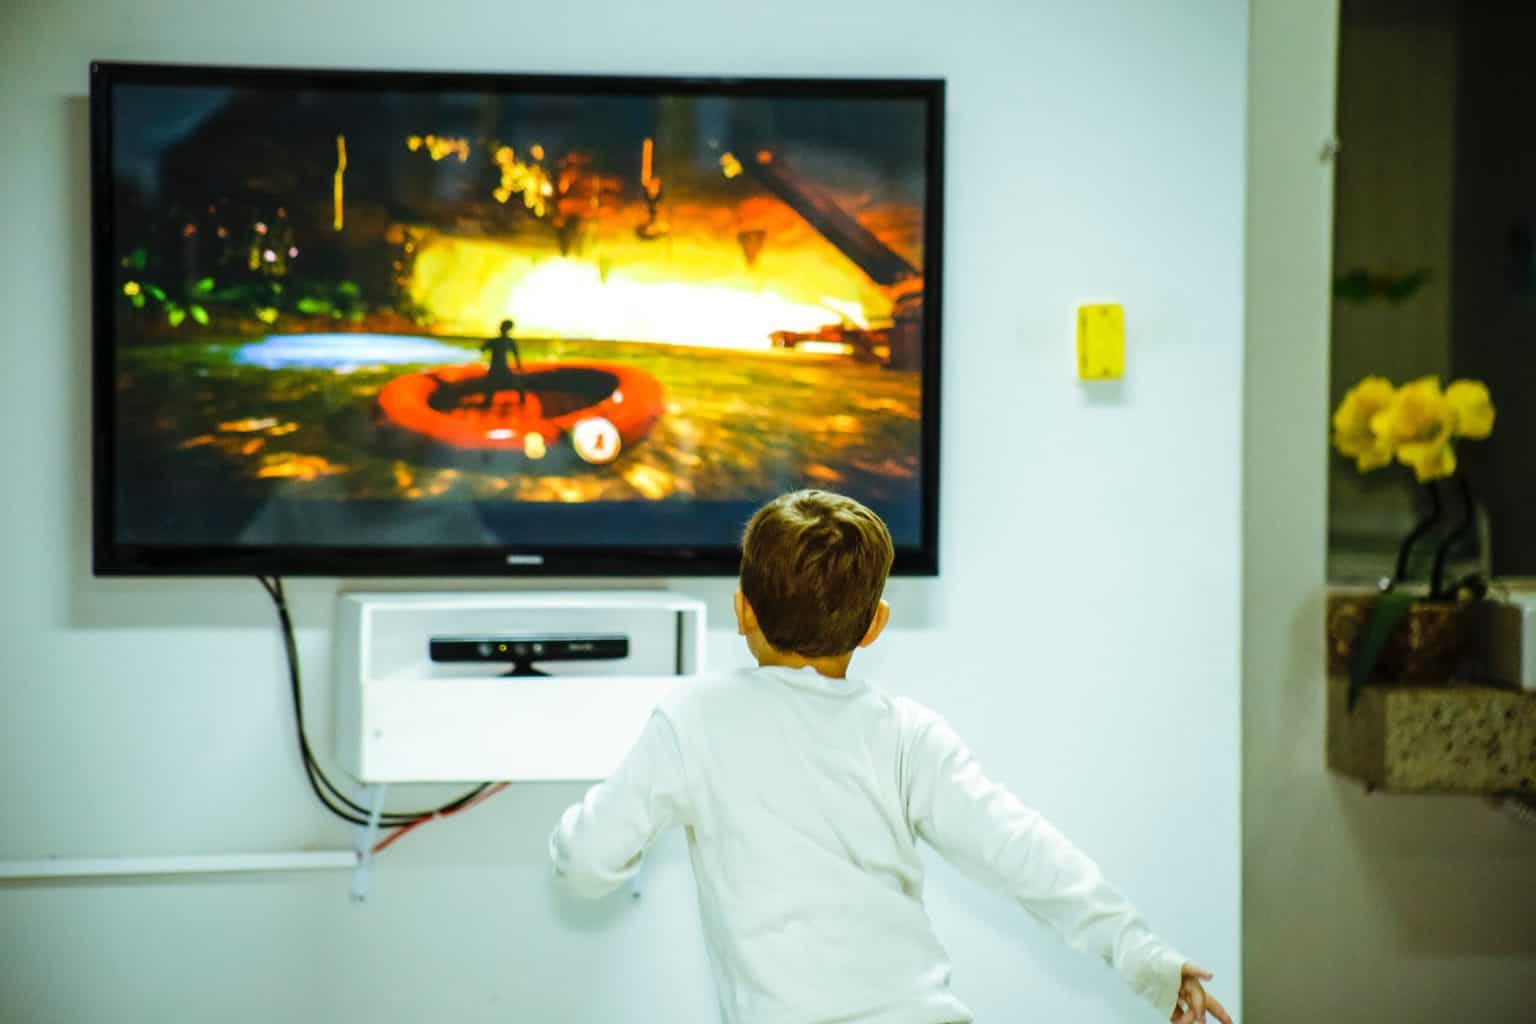 A child running towards the mounted tv